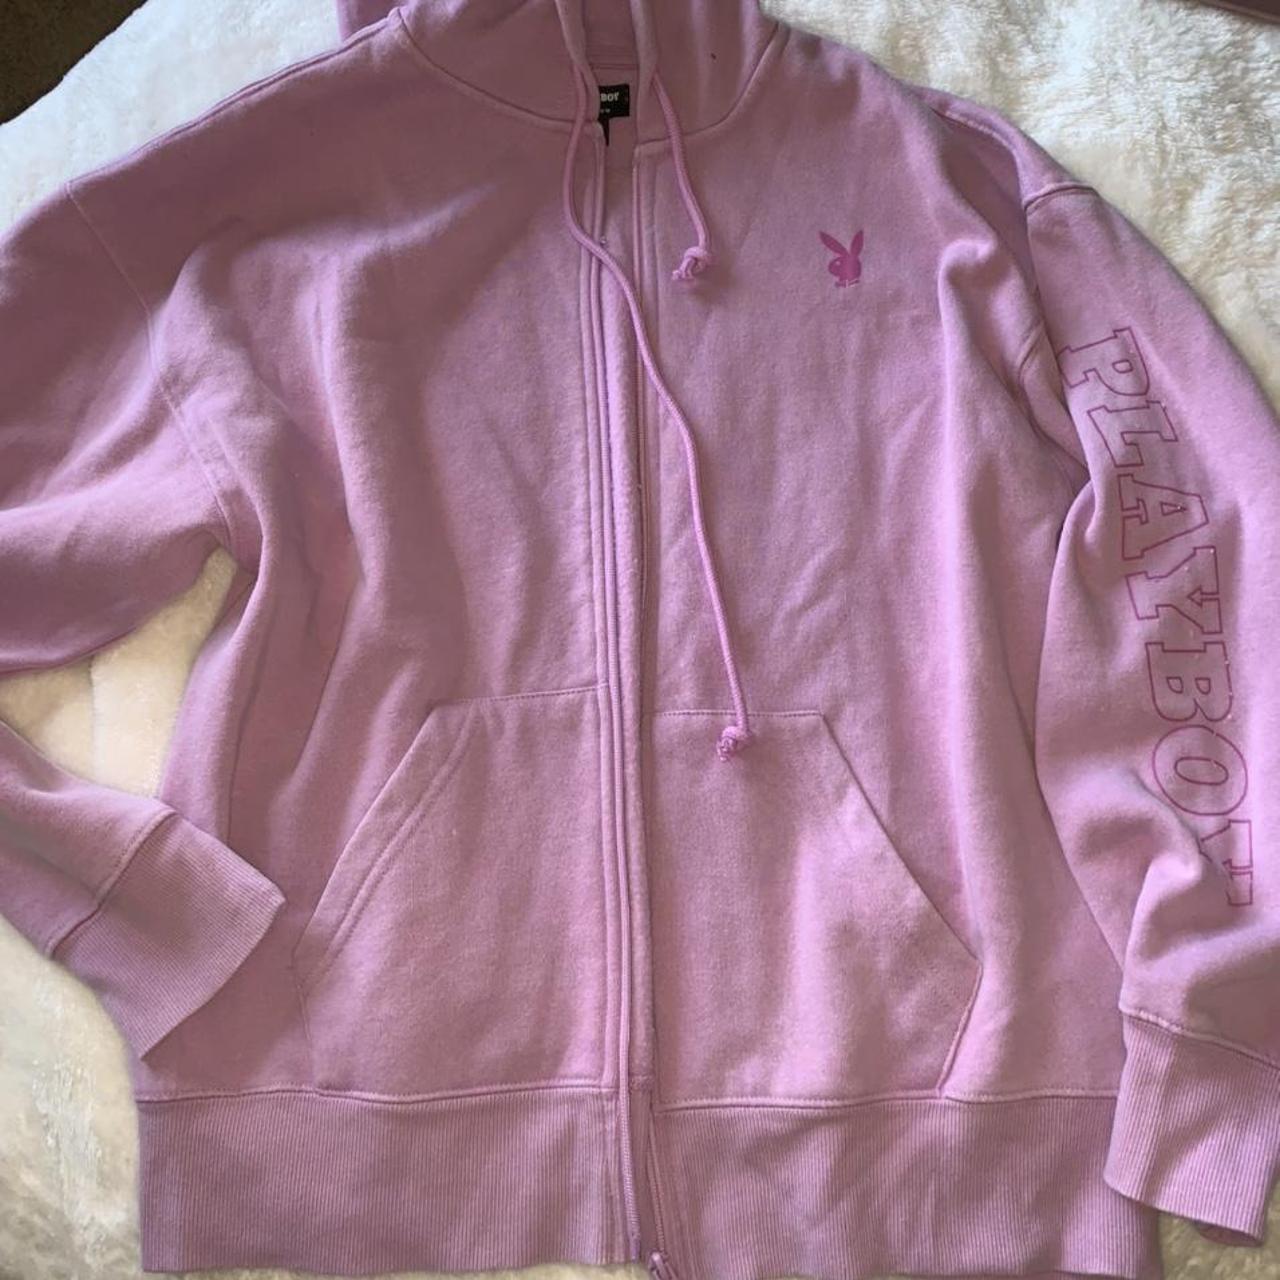 Playboy X Pacsun collab zip up I am usually a size... - Depop